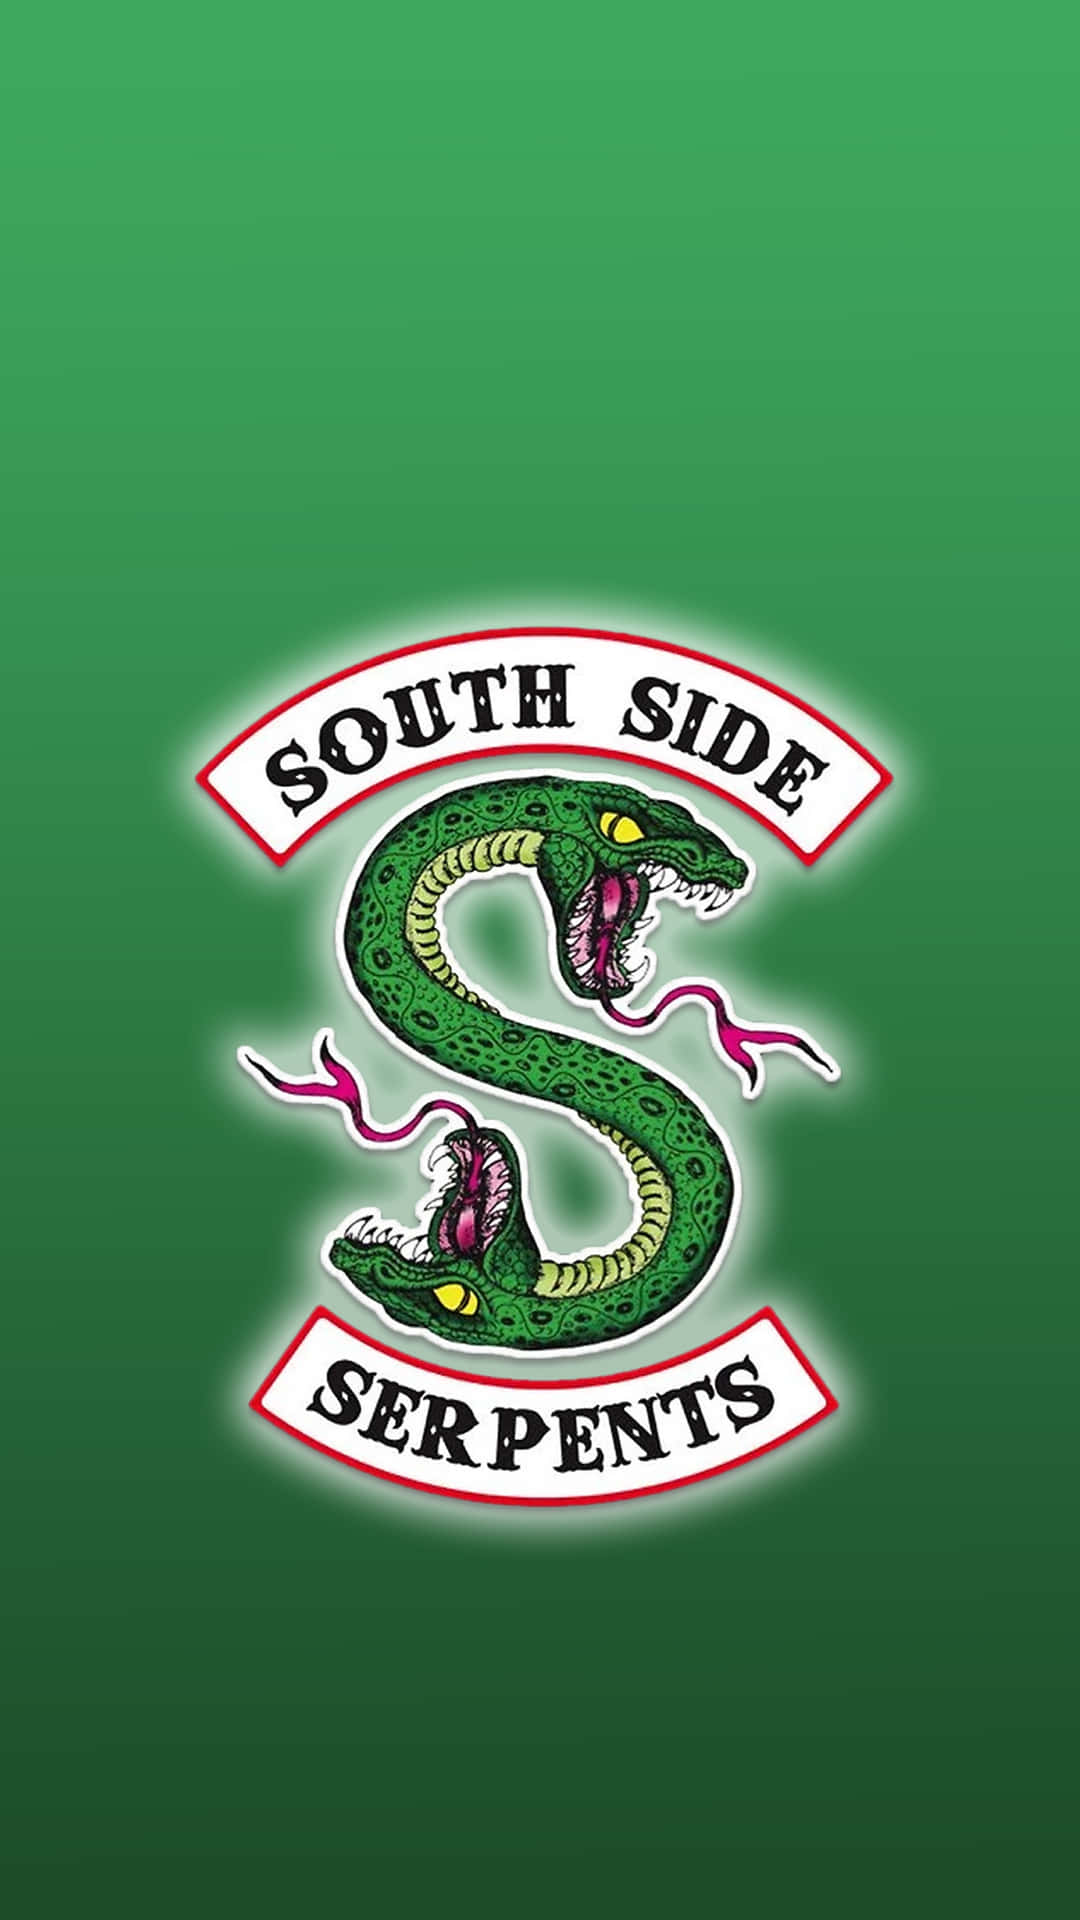 South Side Serpents Logo On Green Background Wallpaper